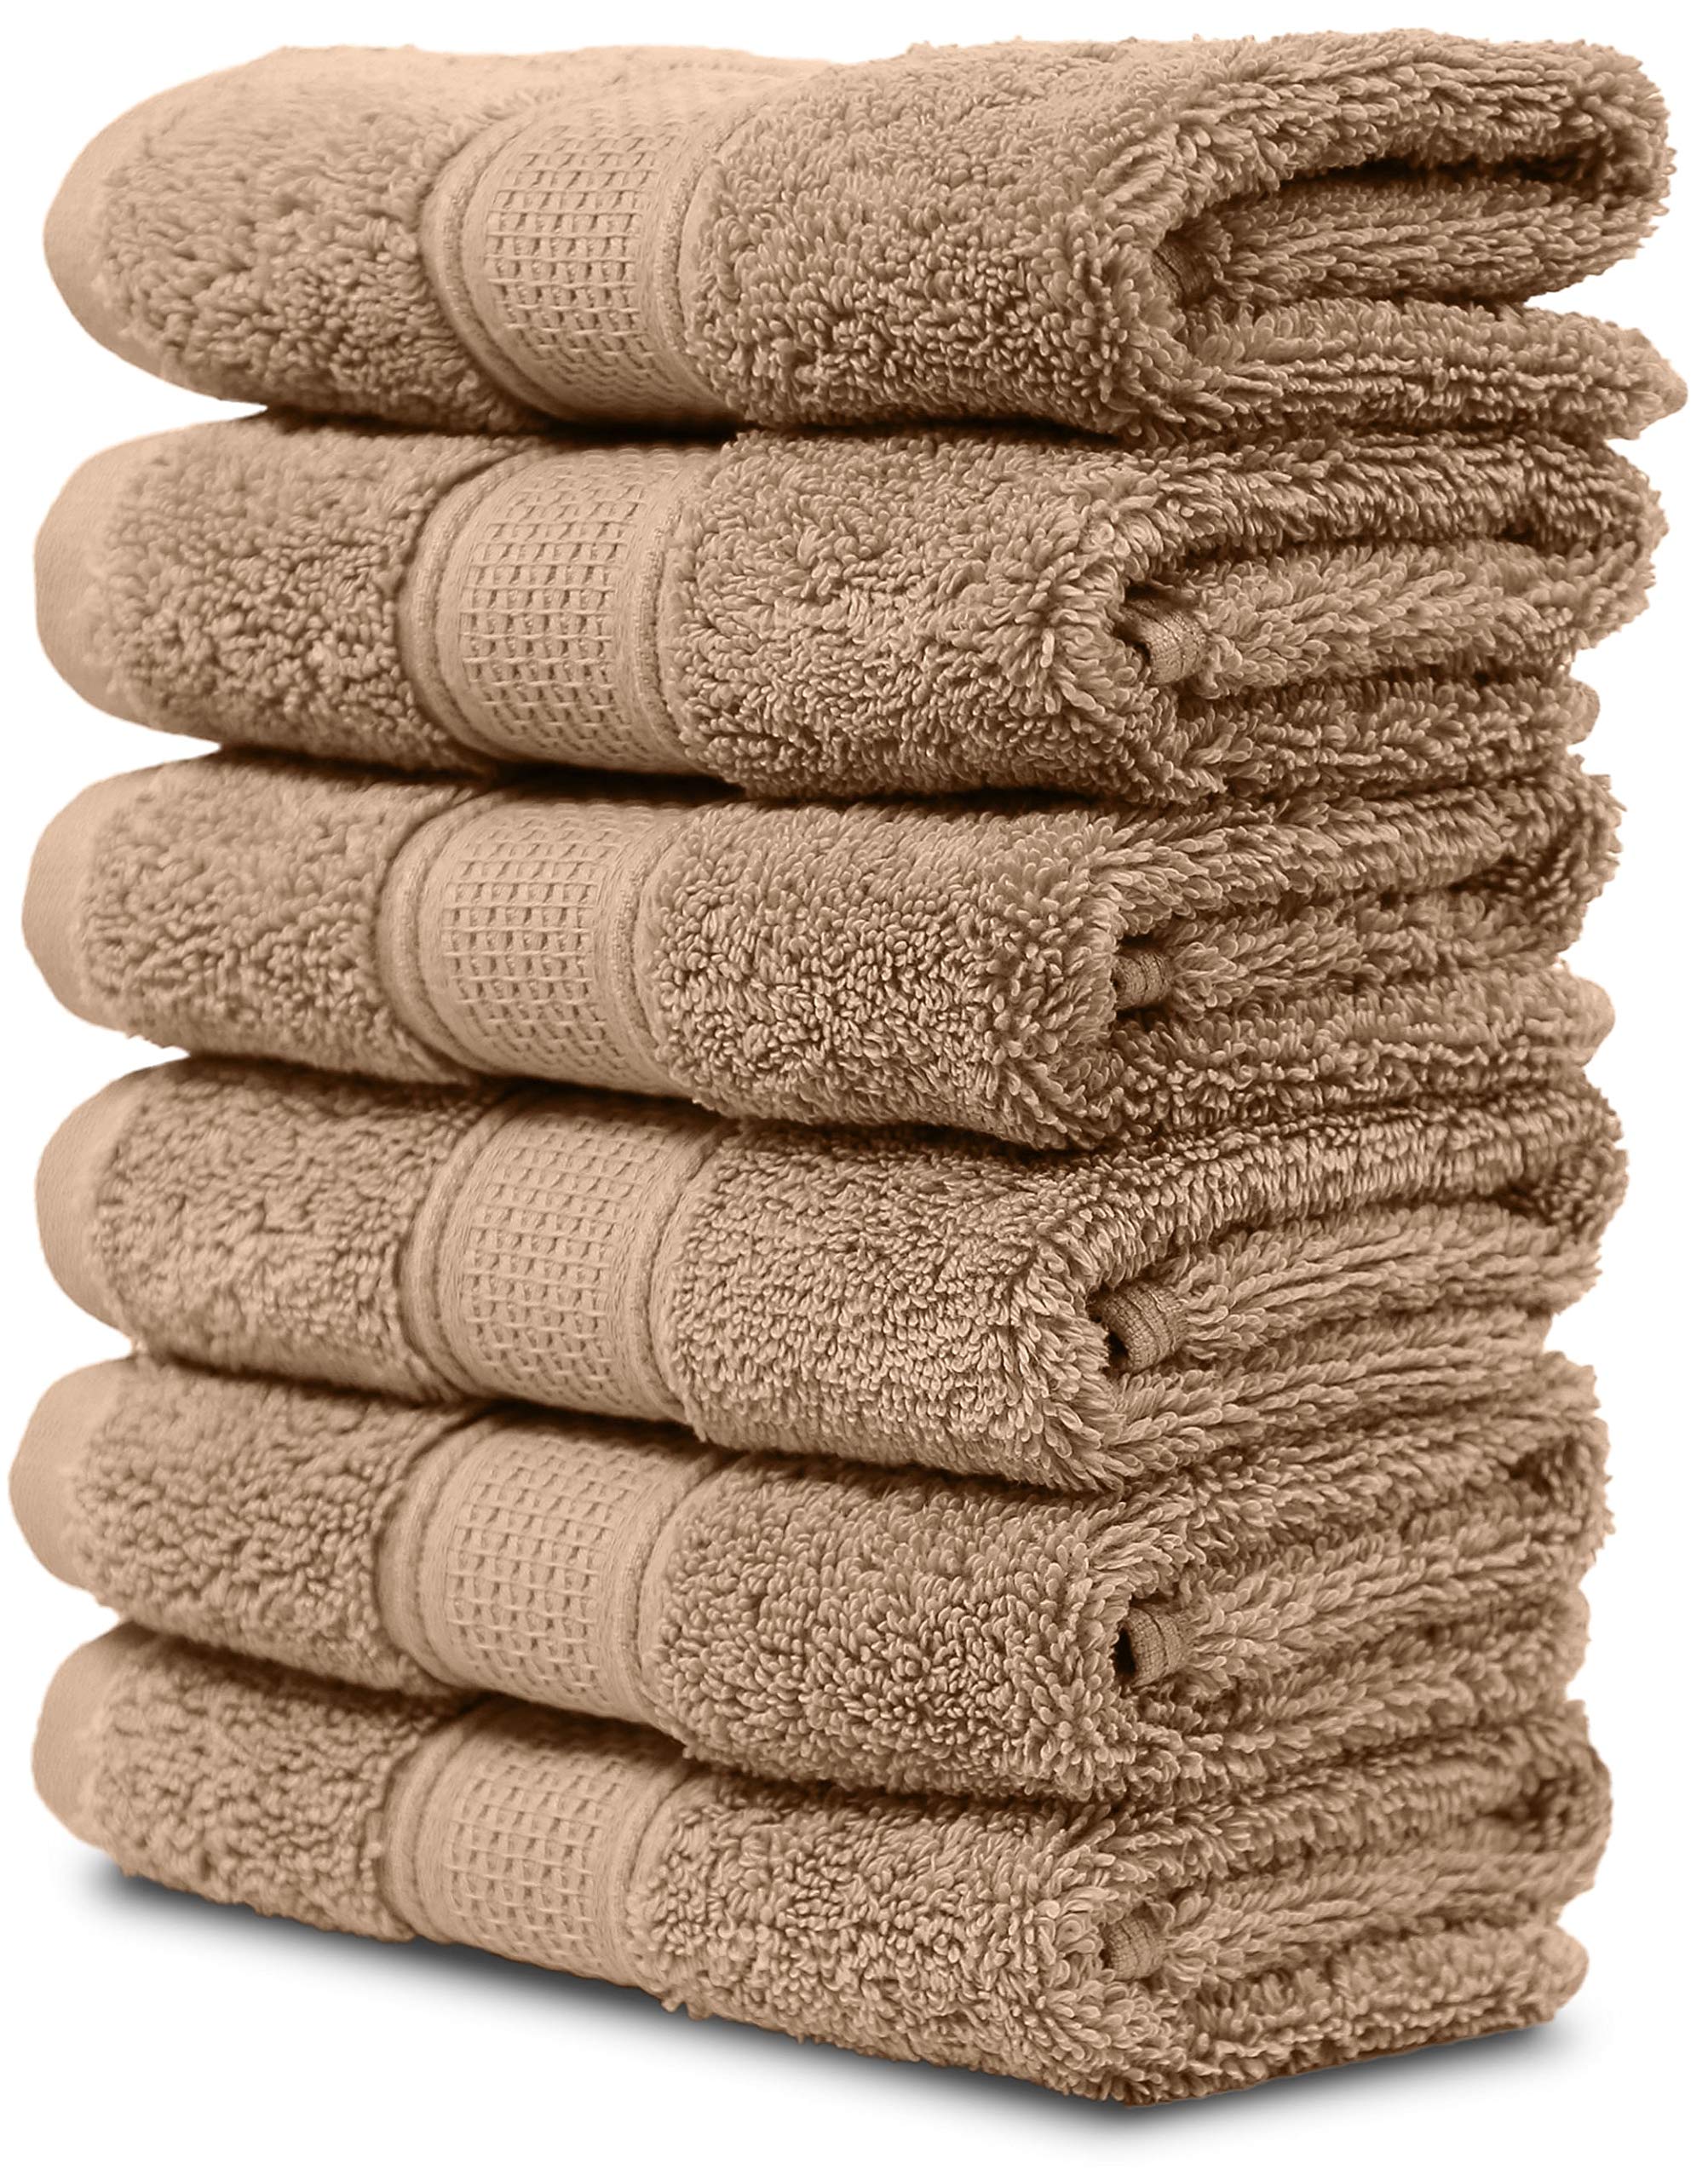 Book Cover Maura Luxurious Turkish Washcloth Set 6 Pack - Soft, Thick, Plush & Super Absorbent Premium Hotel & Spa Quality Oversized Cotton Face Towels. Enhance Your Bathroom - Brown Washcloth (6-Pack) Sand